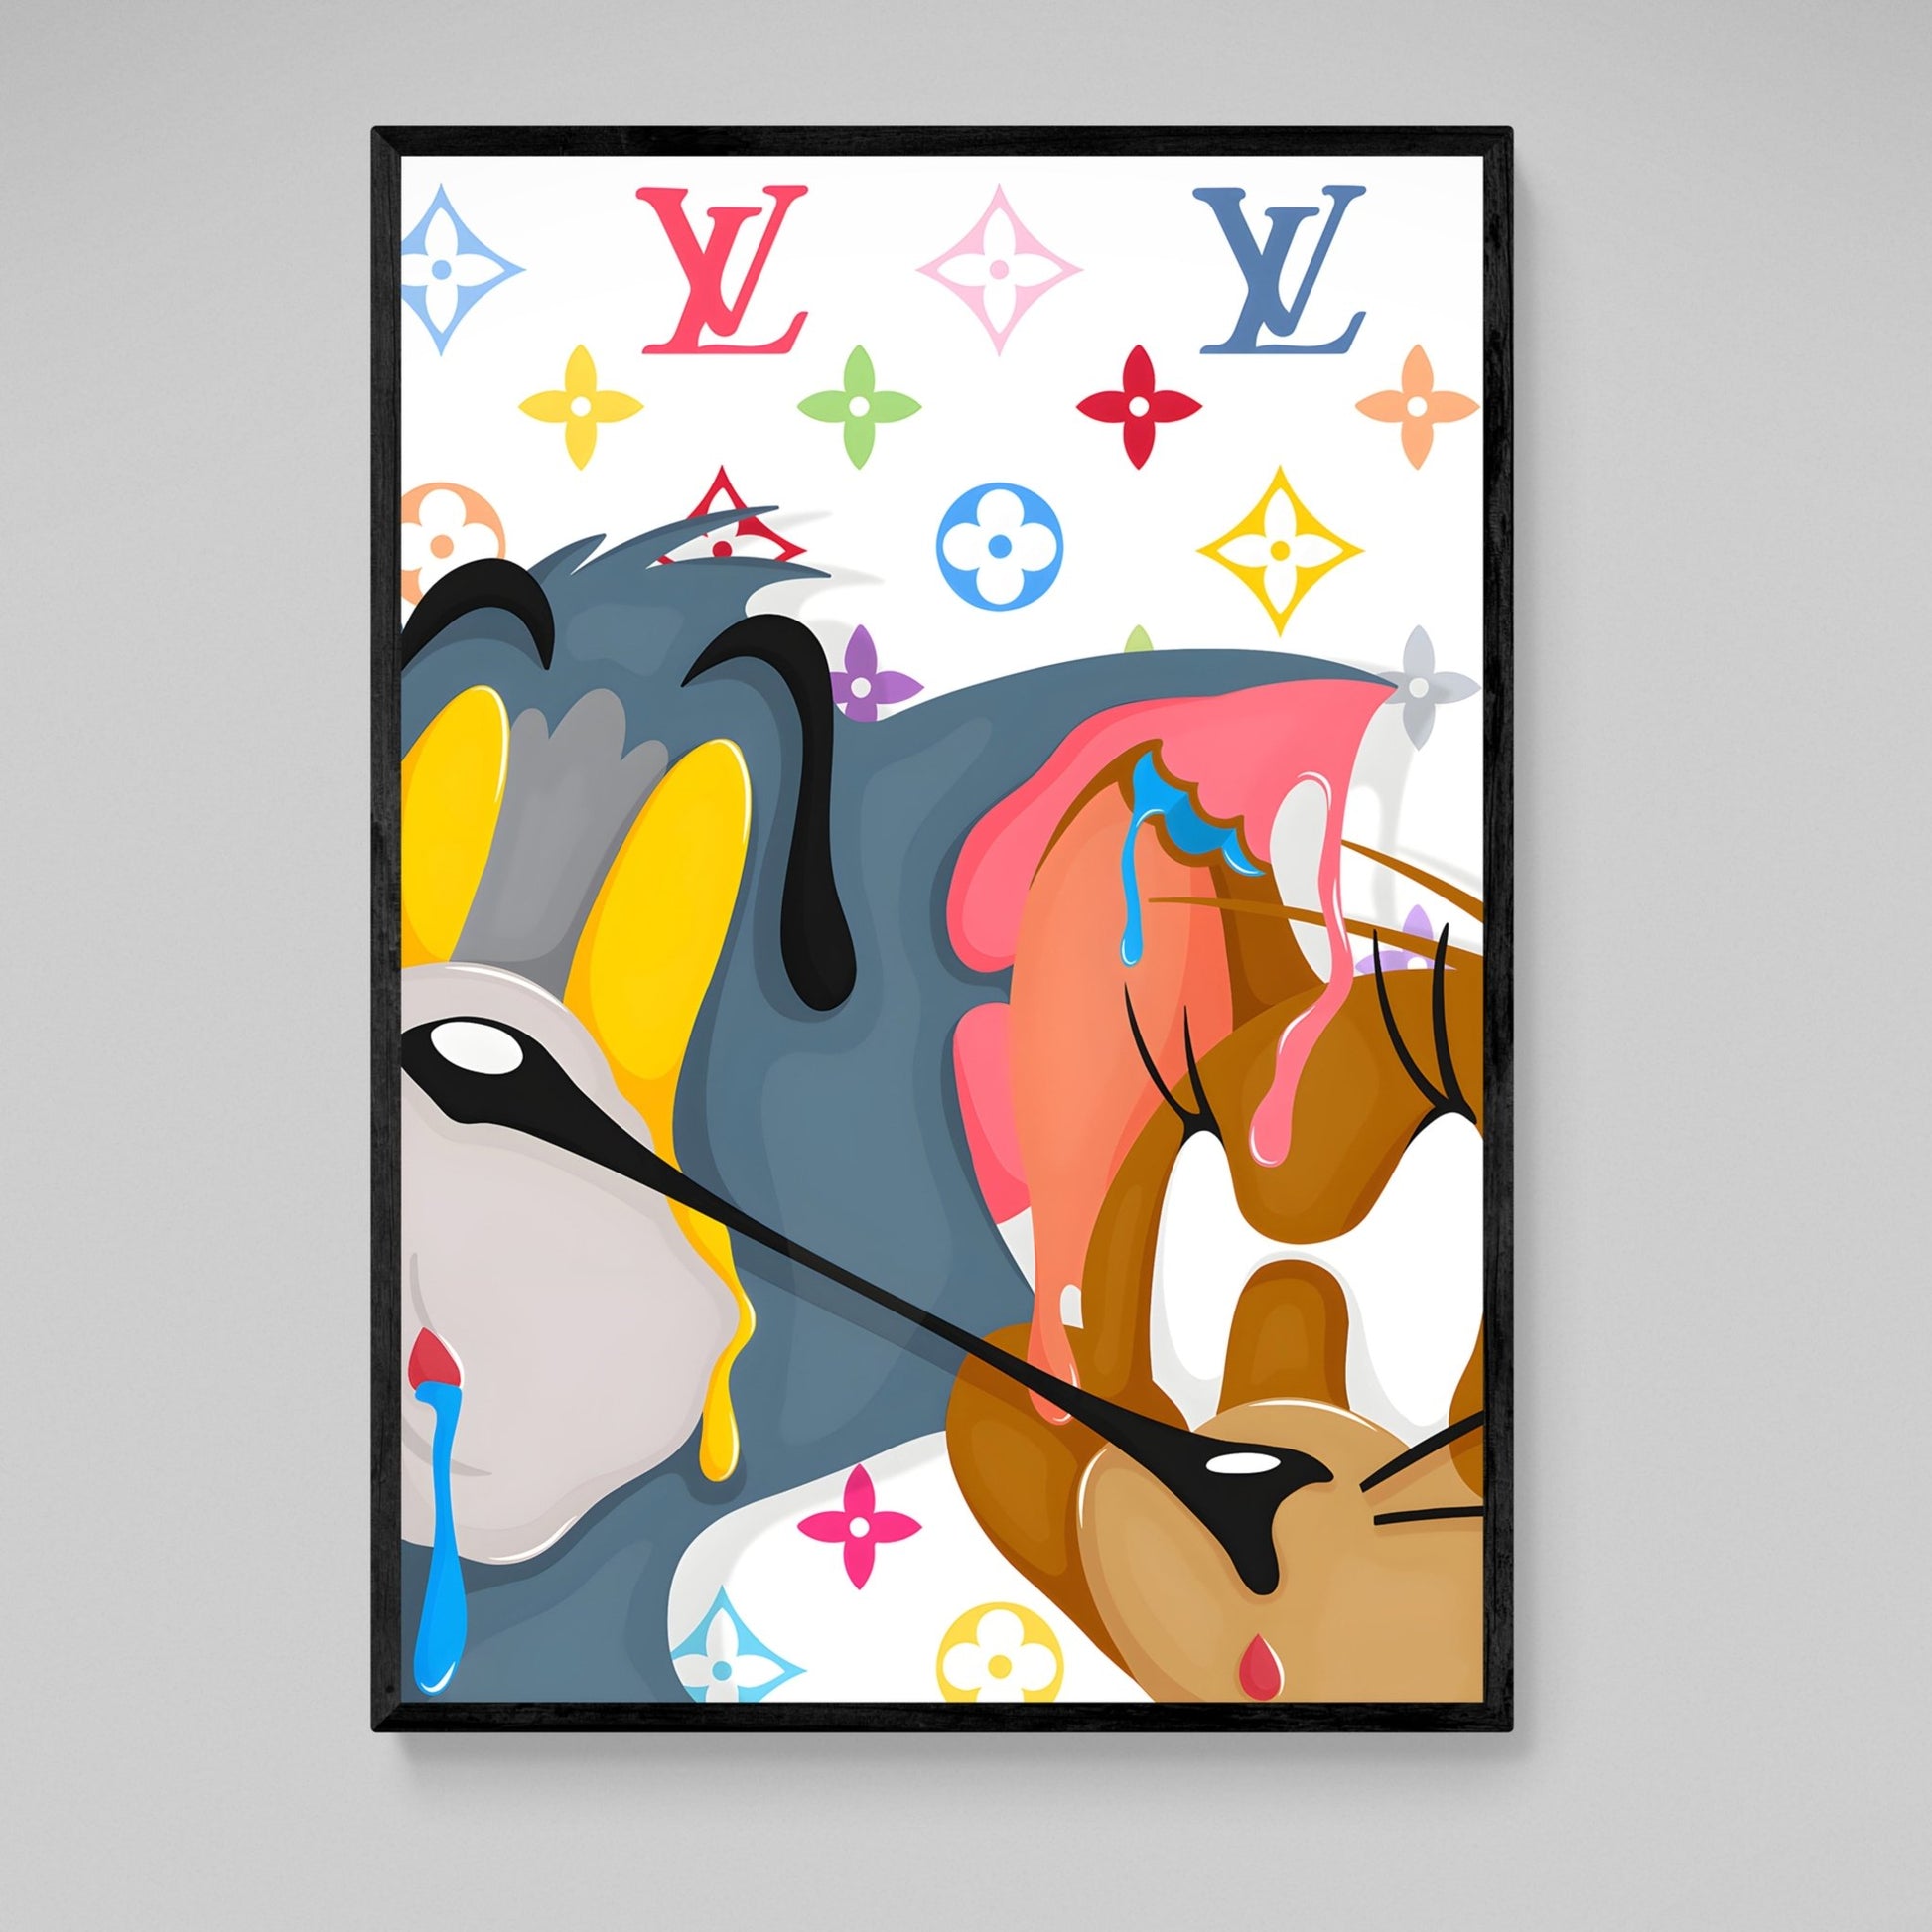 Page 2 Results for Louis Vuitton Wall Art, Canvas Prints